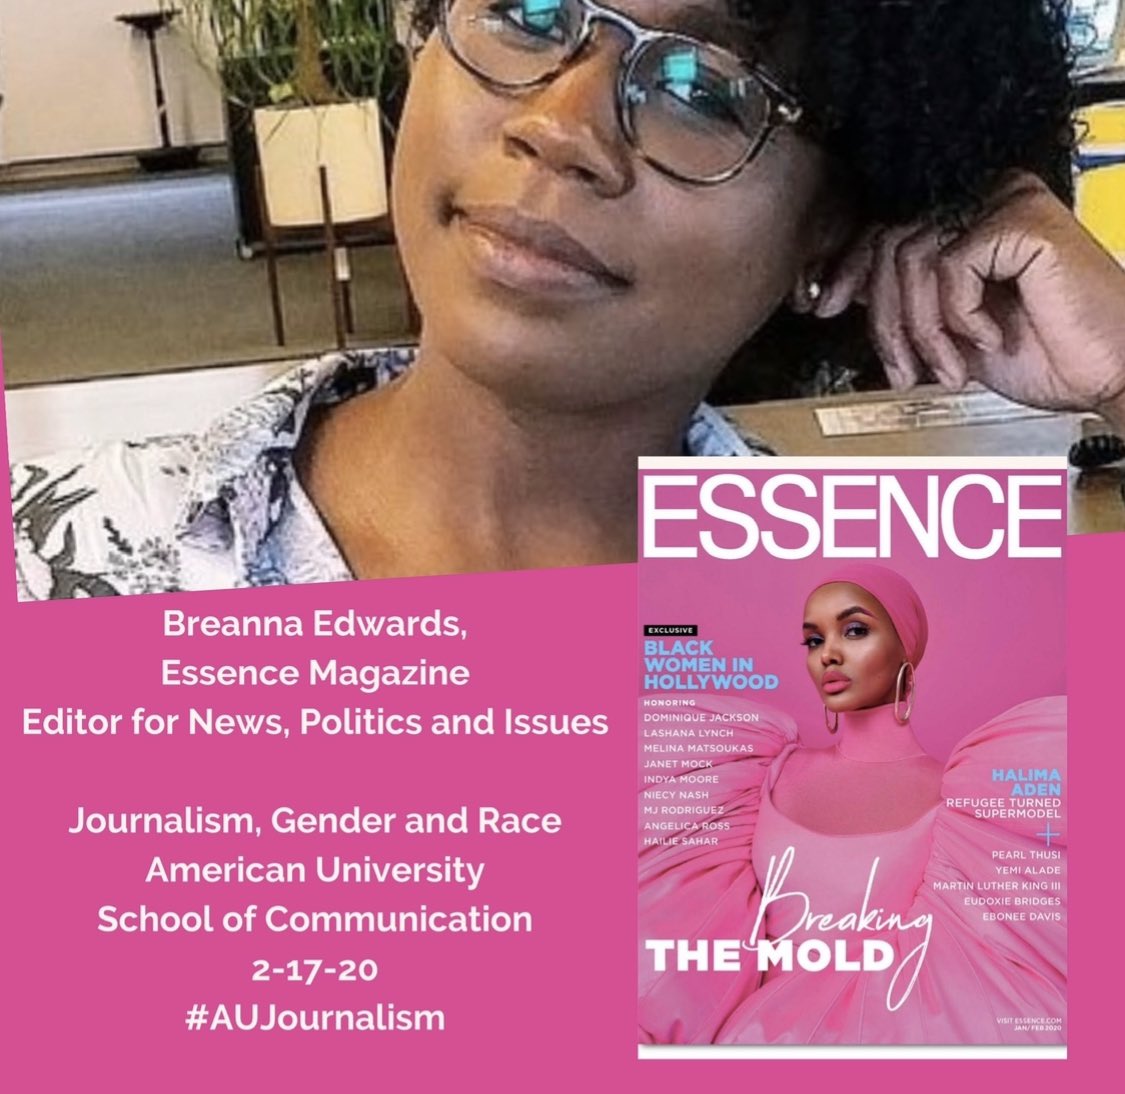 A week later  @Essence’s news, politics & issues editor  @Edwards_Bre visited our class to discuss journalism, gender, race and politics. Some of  @theblackprintAU staff joined us for this informative talk  #Election2020    #Vision2020Nation  @AU_SOC  @AmericanU https://issuu.com/sherriwilliams7/docs/vision2020doc